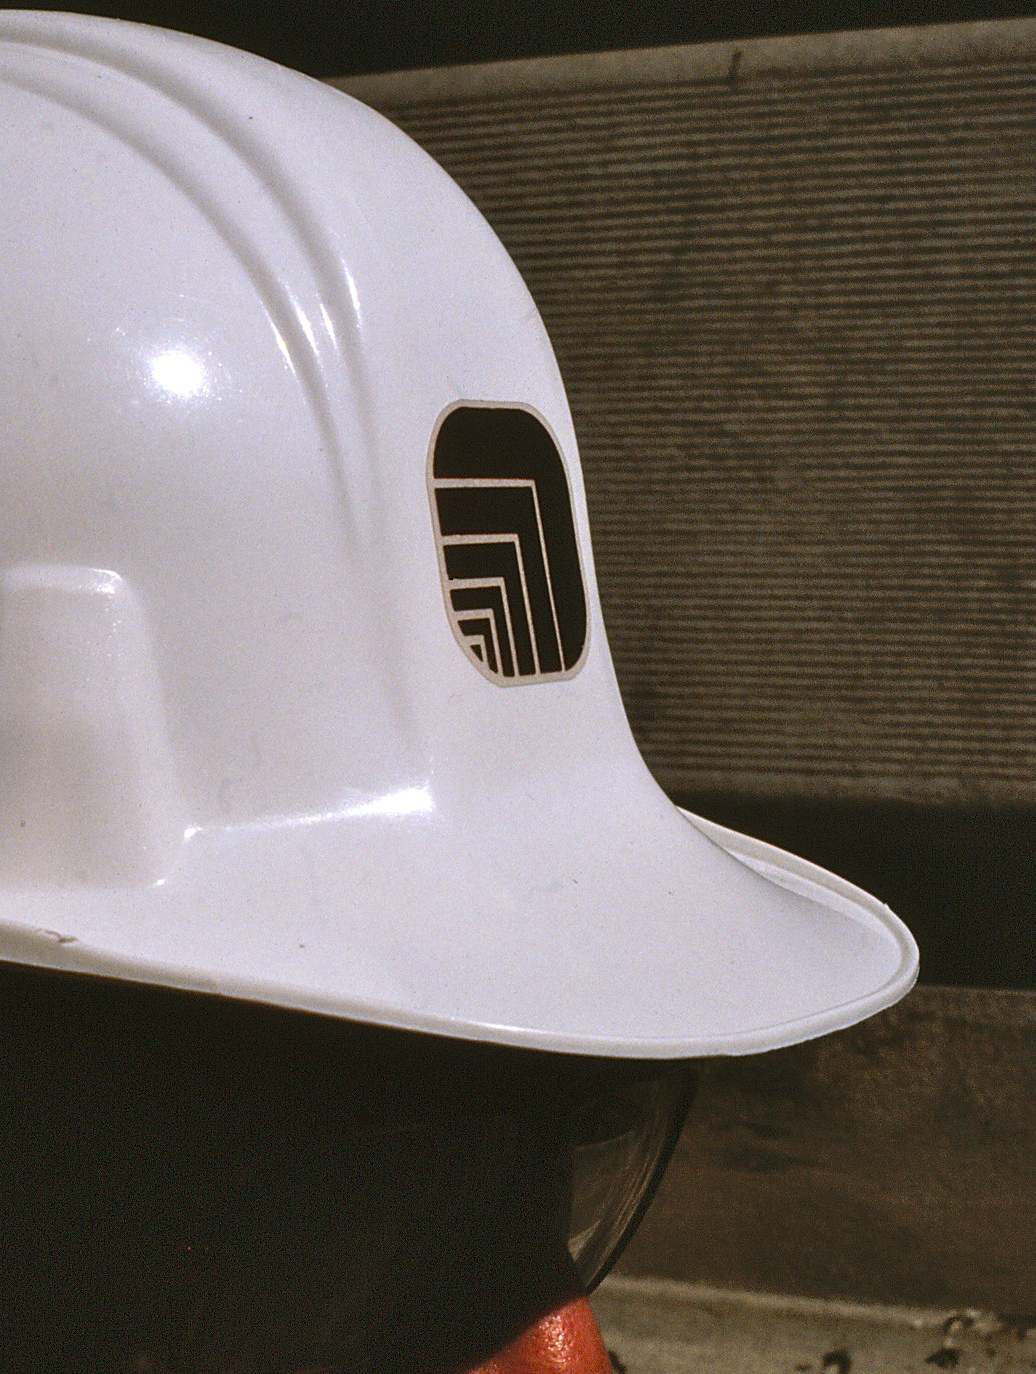 Construction helmet featuring Oxford logo at front.